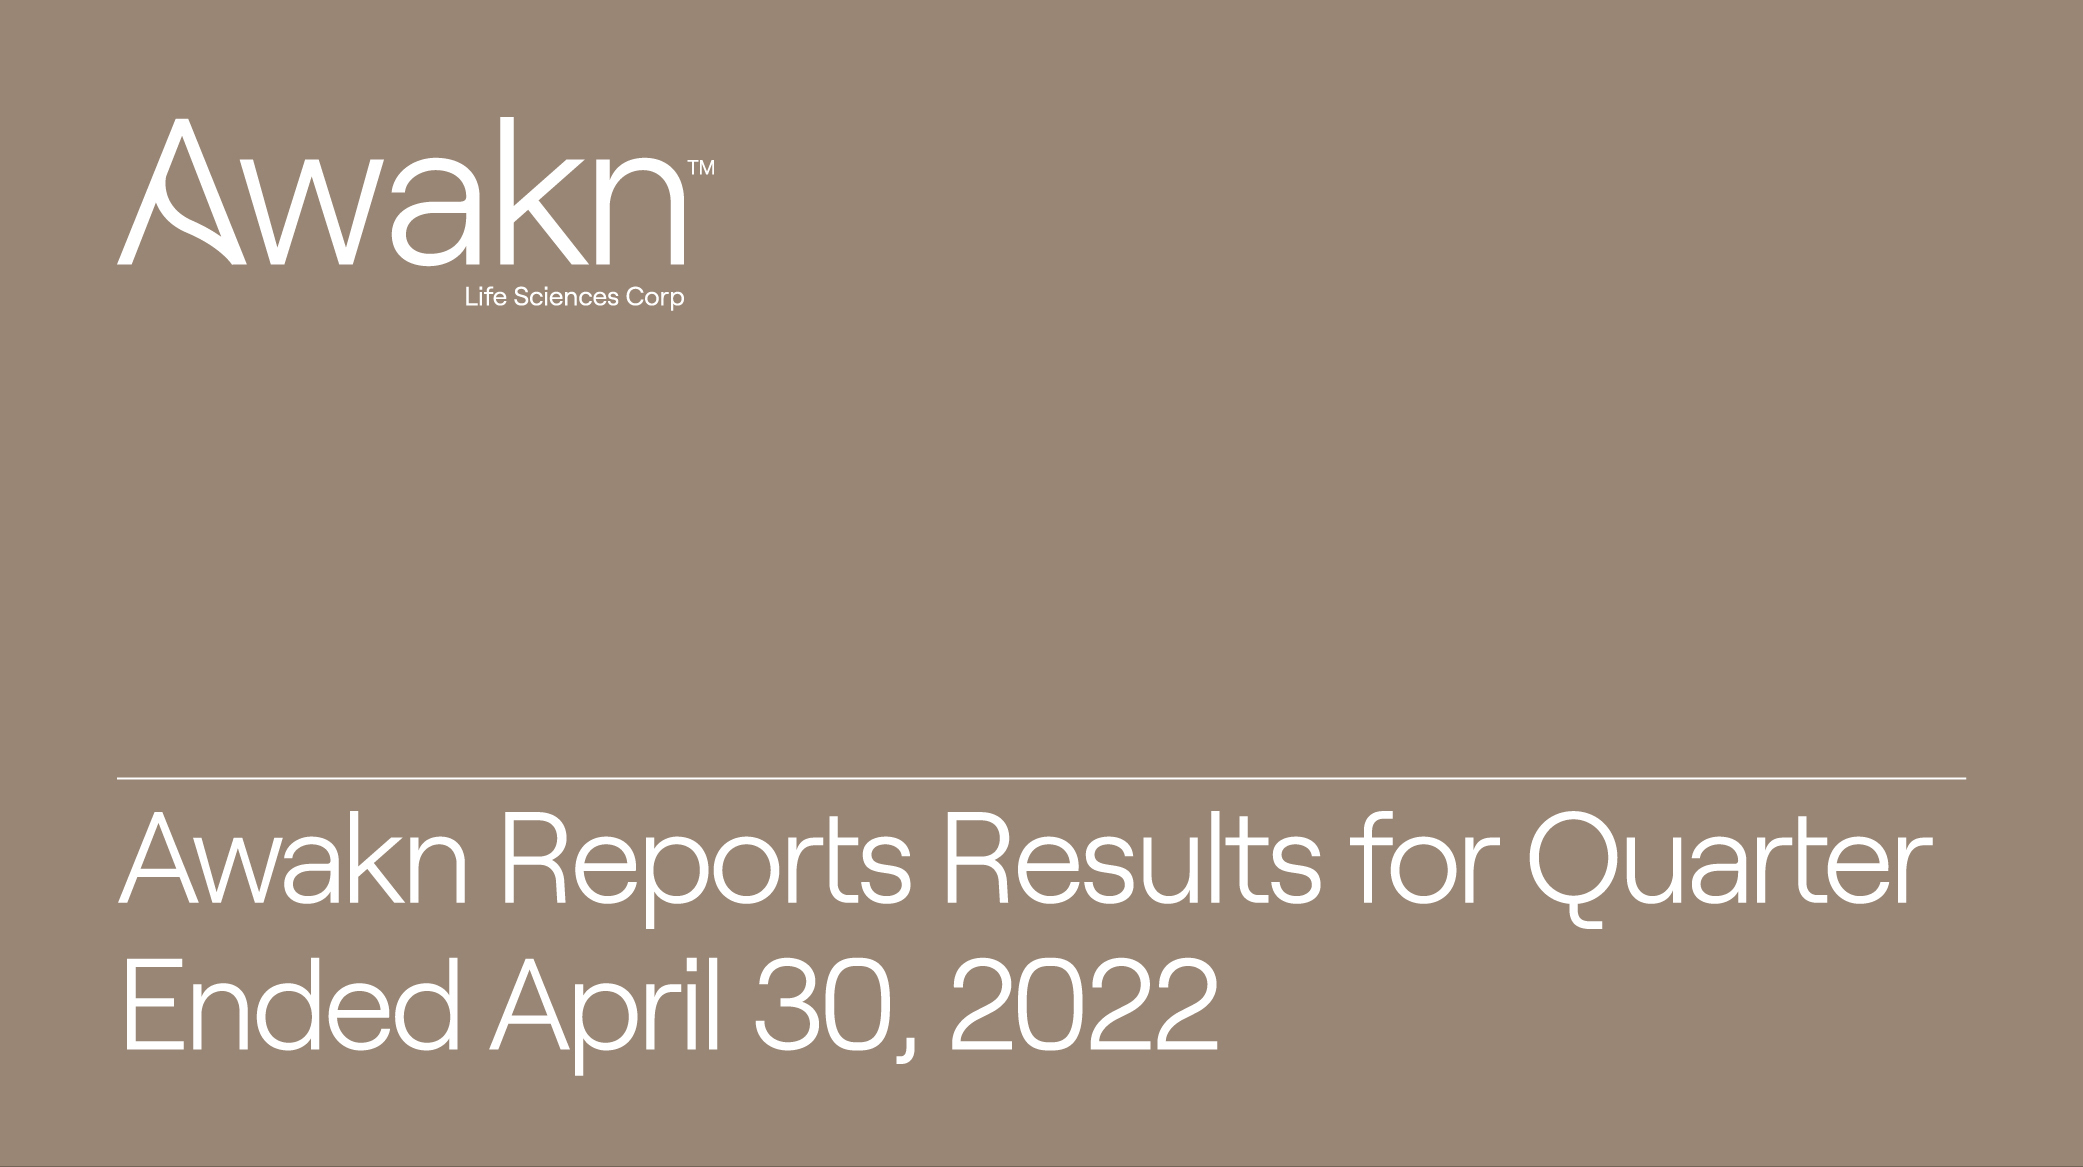 Awakn Life Sciences Reports Results for Quarter Ended April 30, 2022